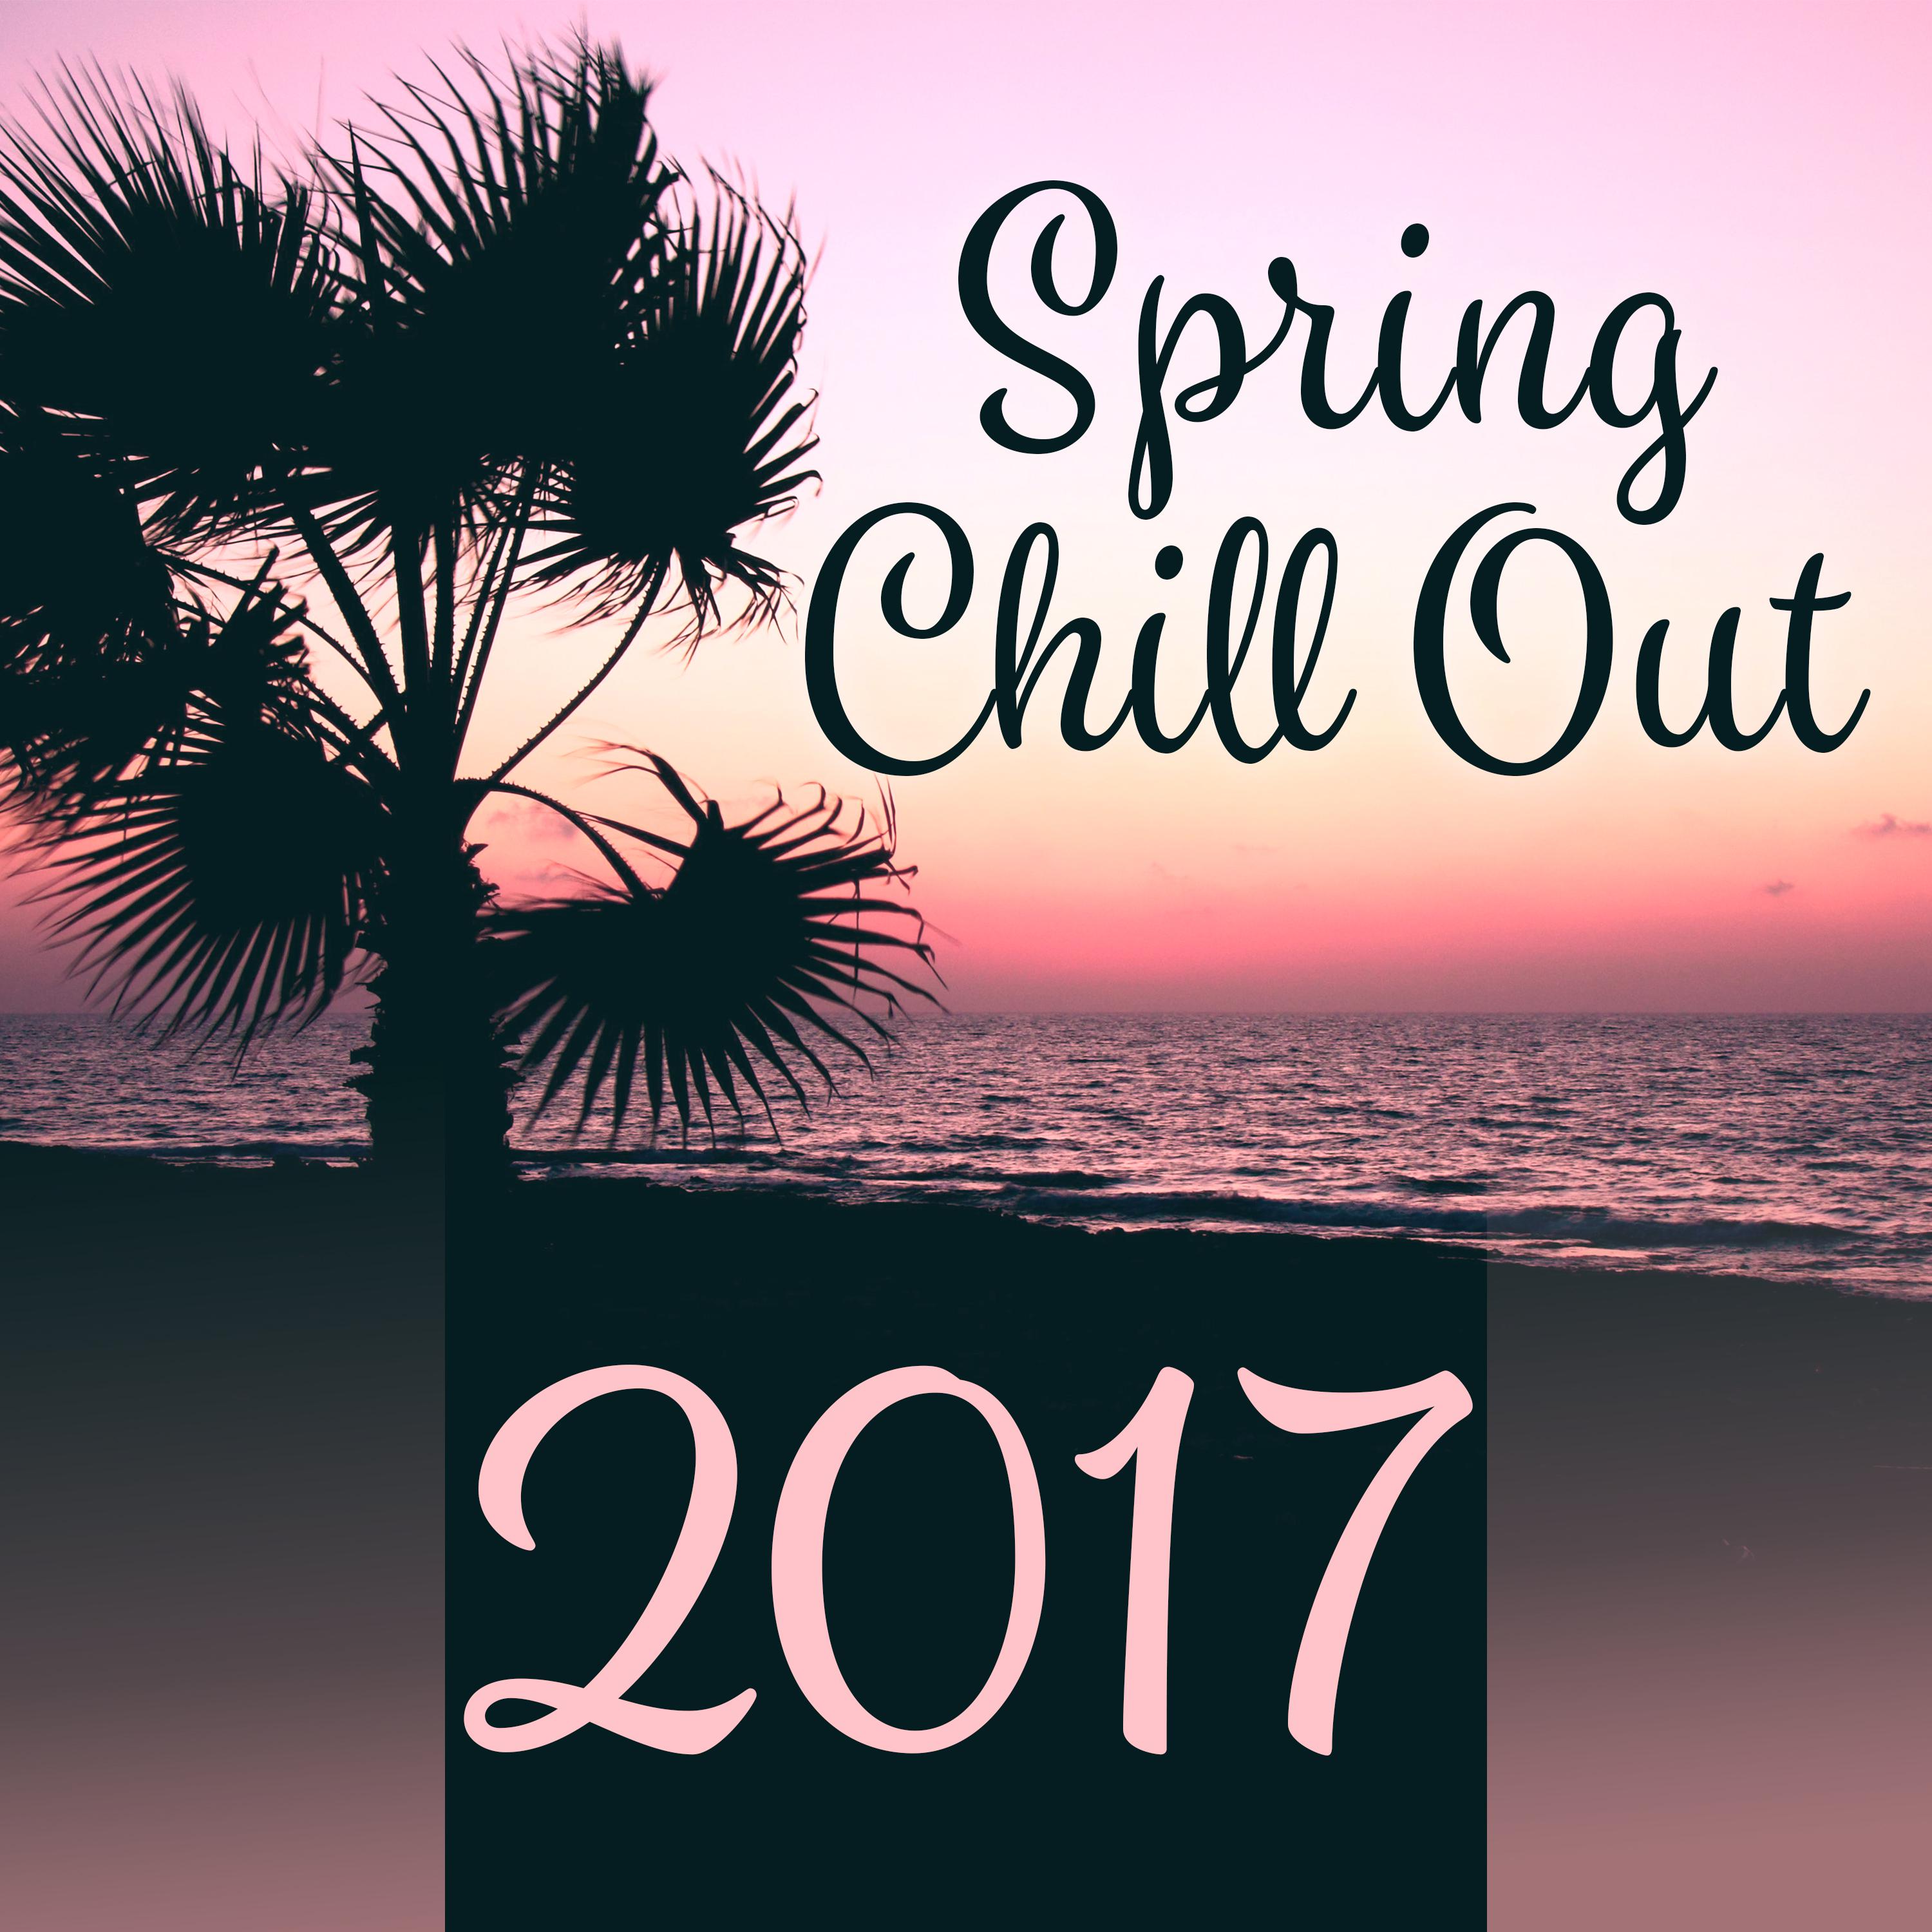 Spring Chill Out 2017  Deep Chillout Sounds, Fresh Hits of Chil Out 2017